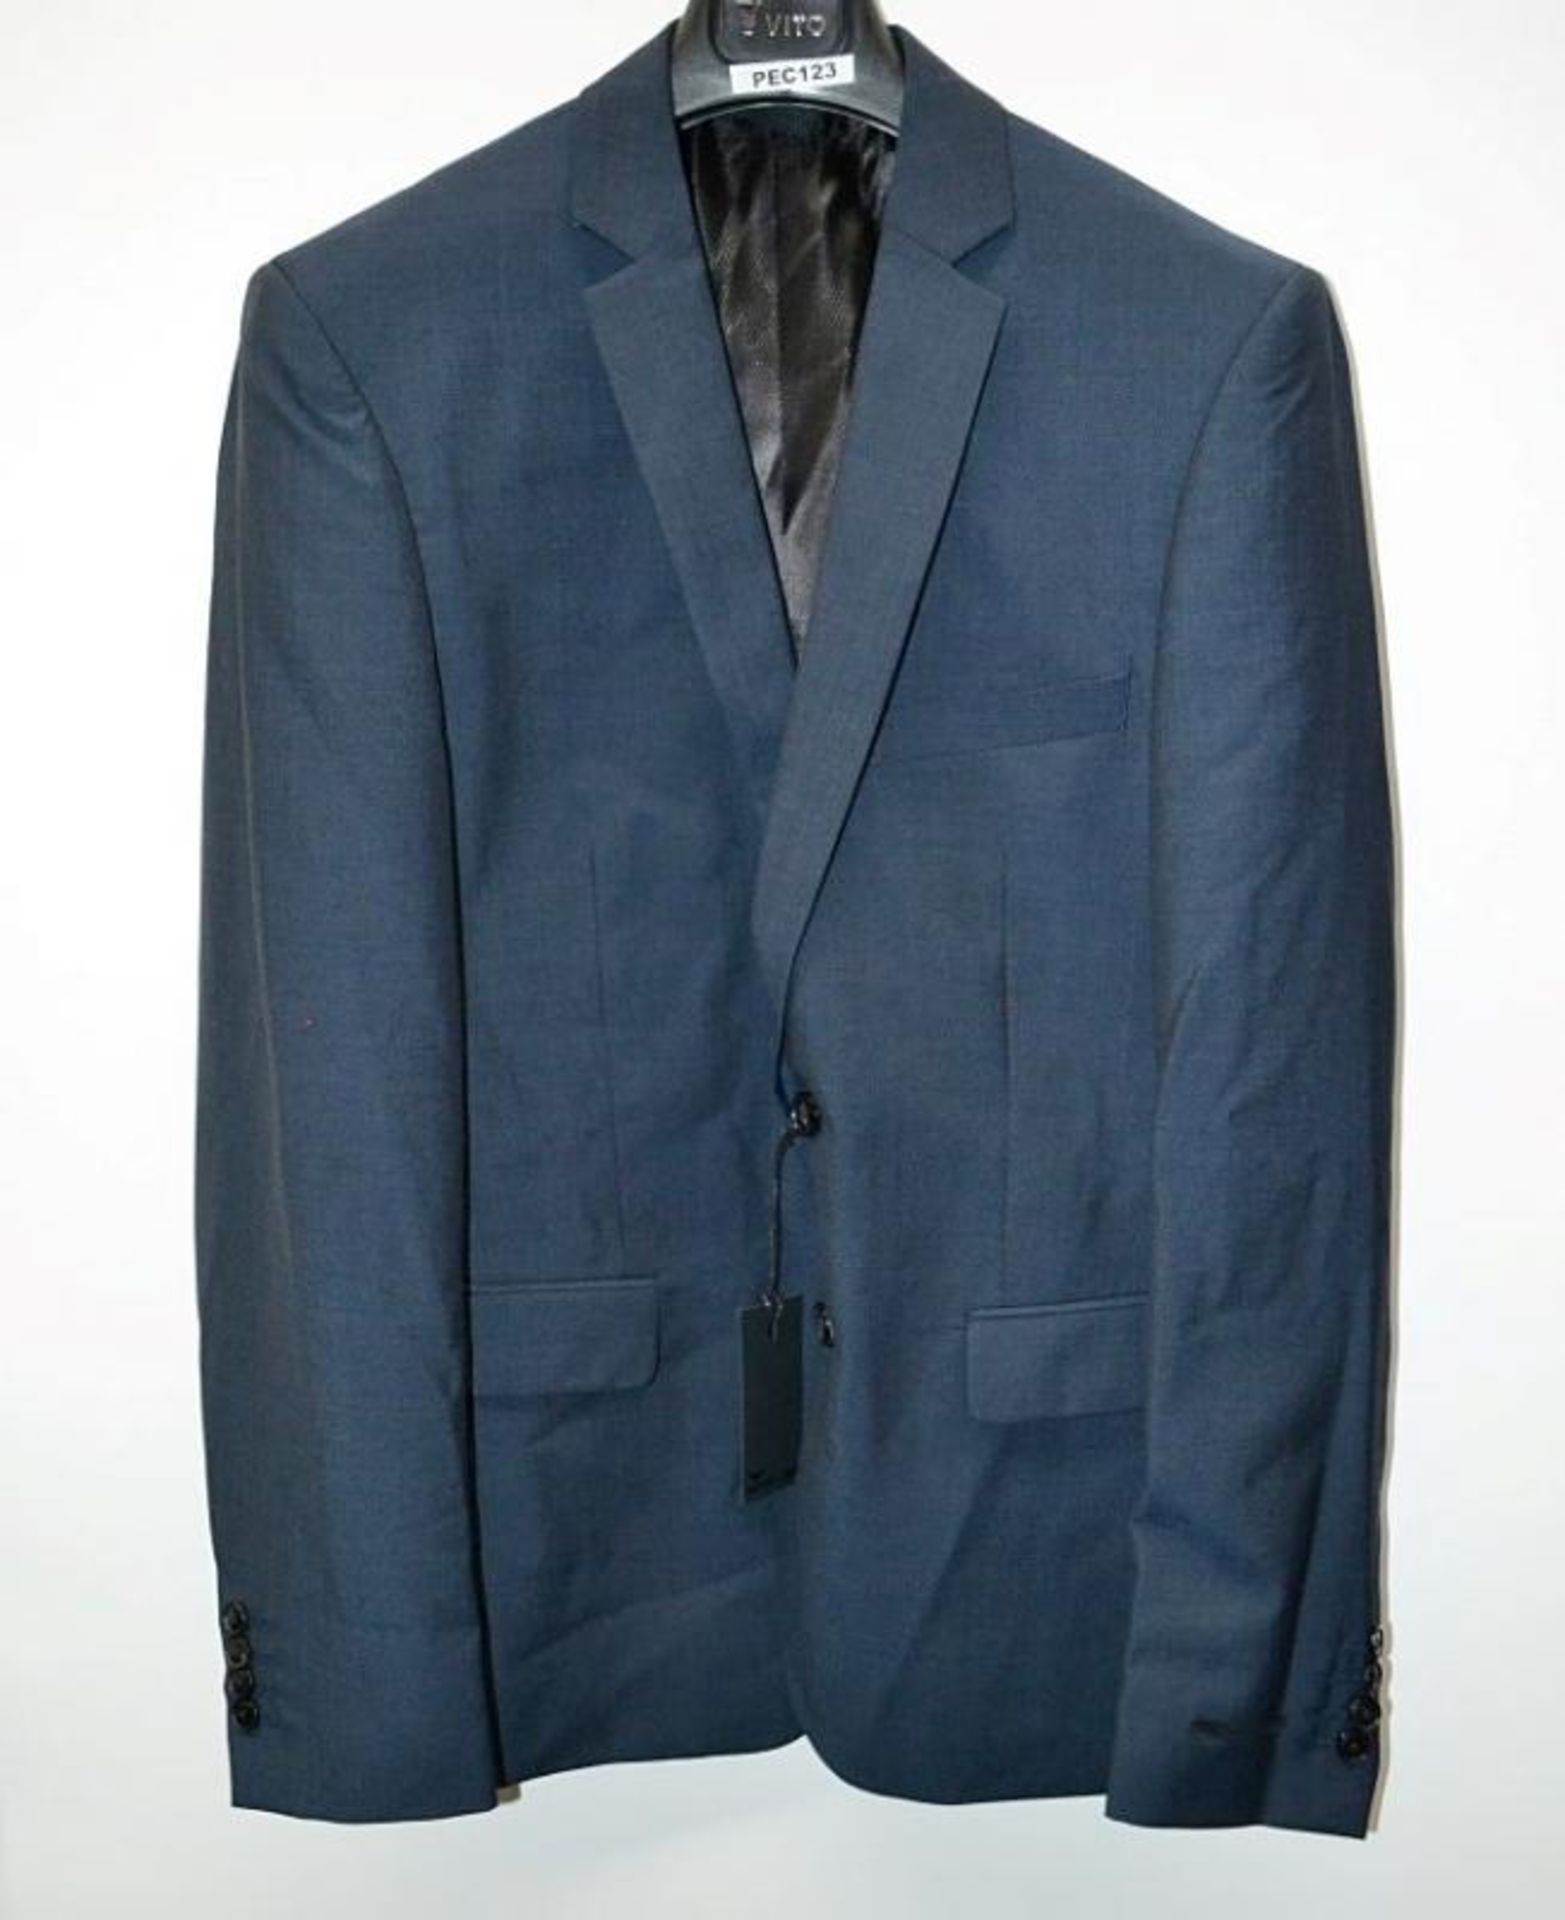 1 x PRE END Branded "LOKE" Mens Blazer Jacket With Waistcoat - New Stock With Tags - Recent Store